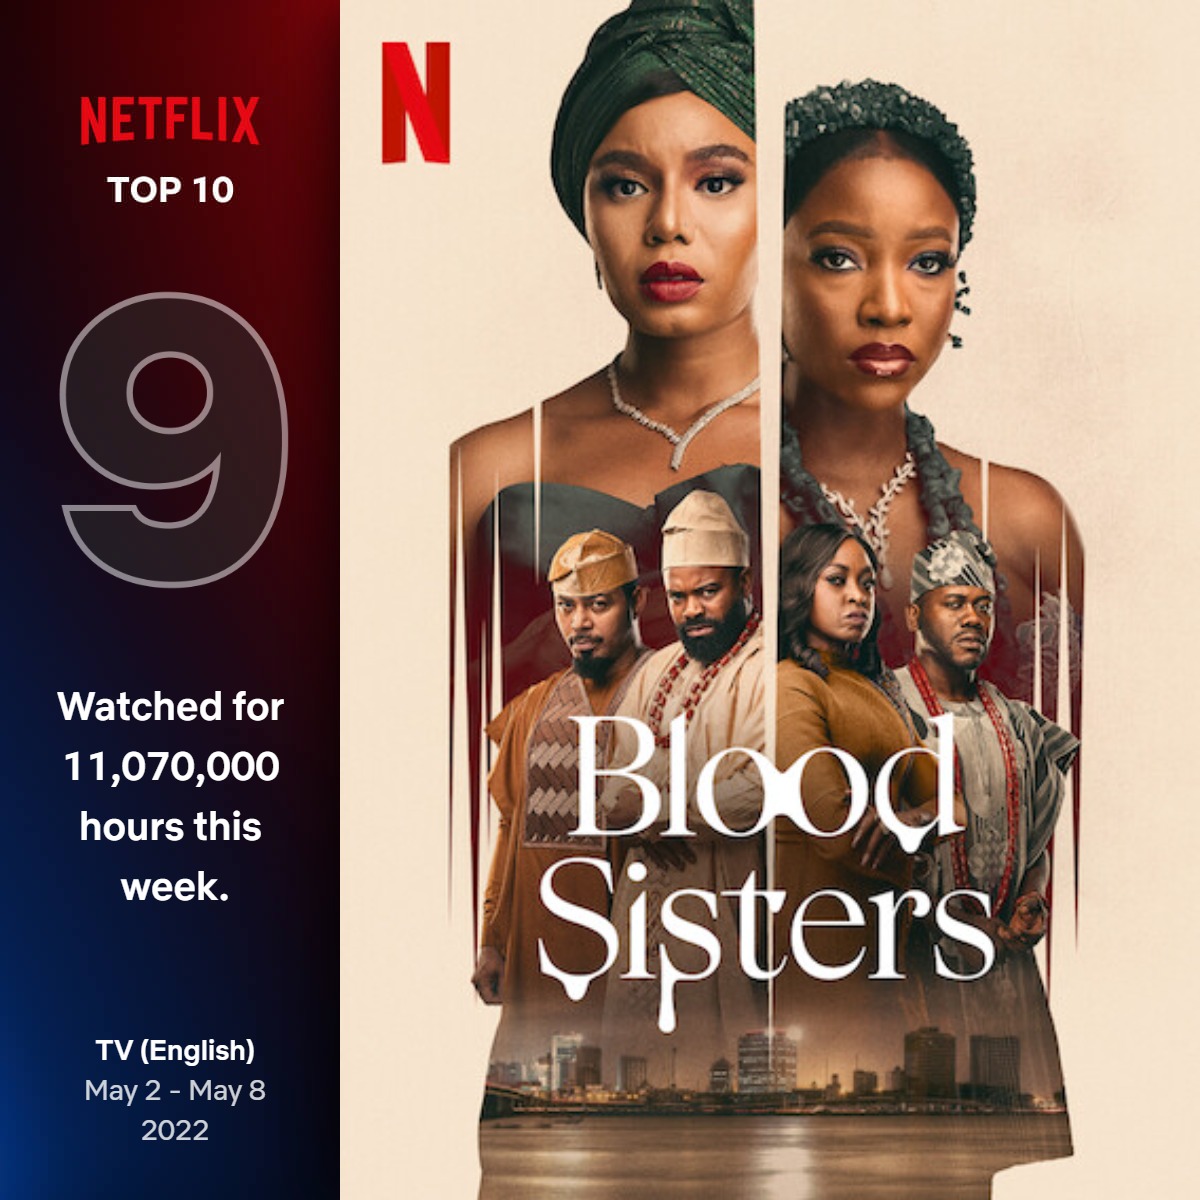 top10 tv english 9 may 2 may 8 2022 1 - Blood Sisters Pulls Global Demand With Over 11 Million Streaming Hours